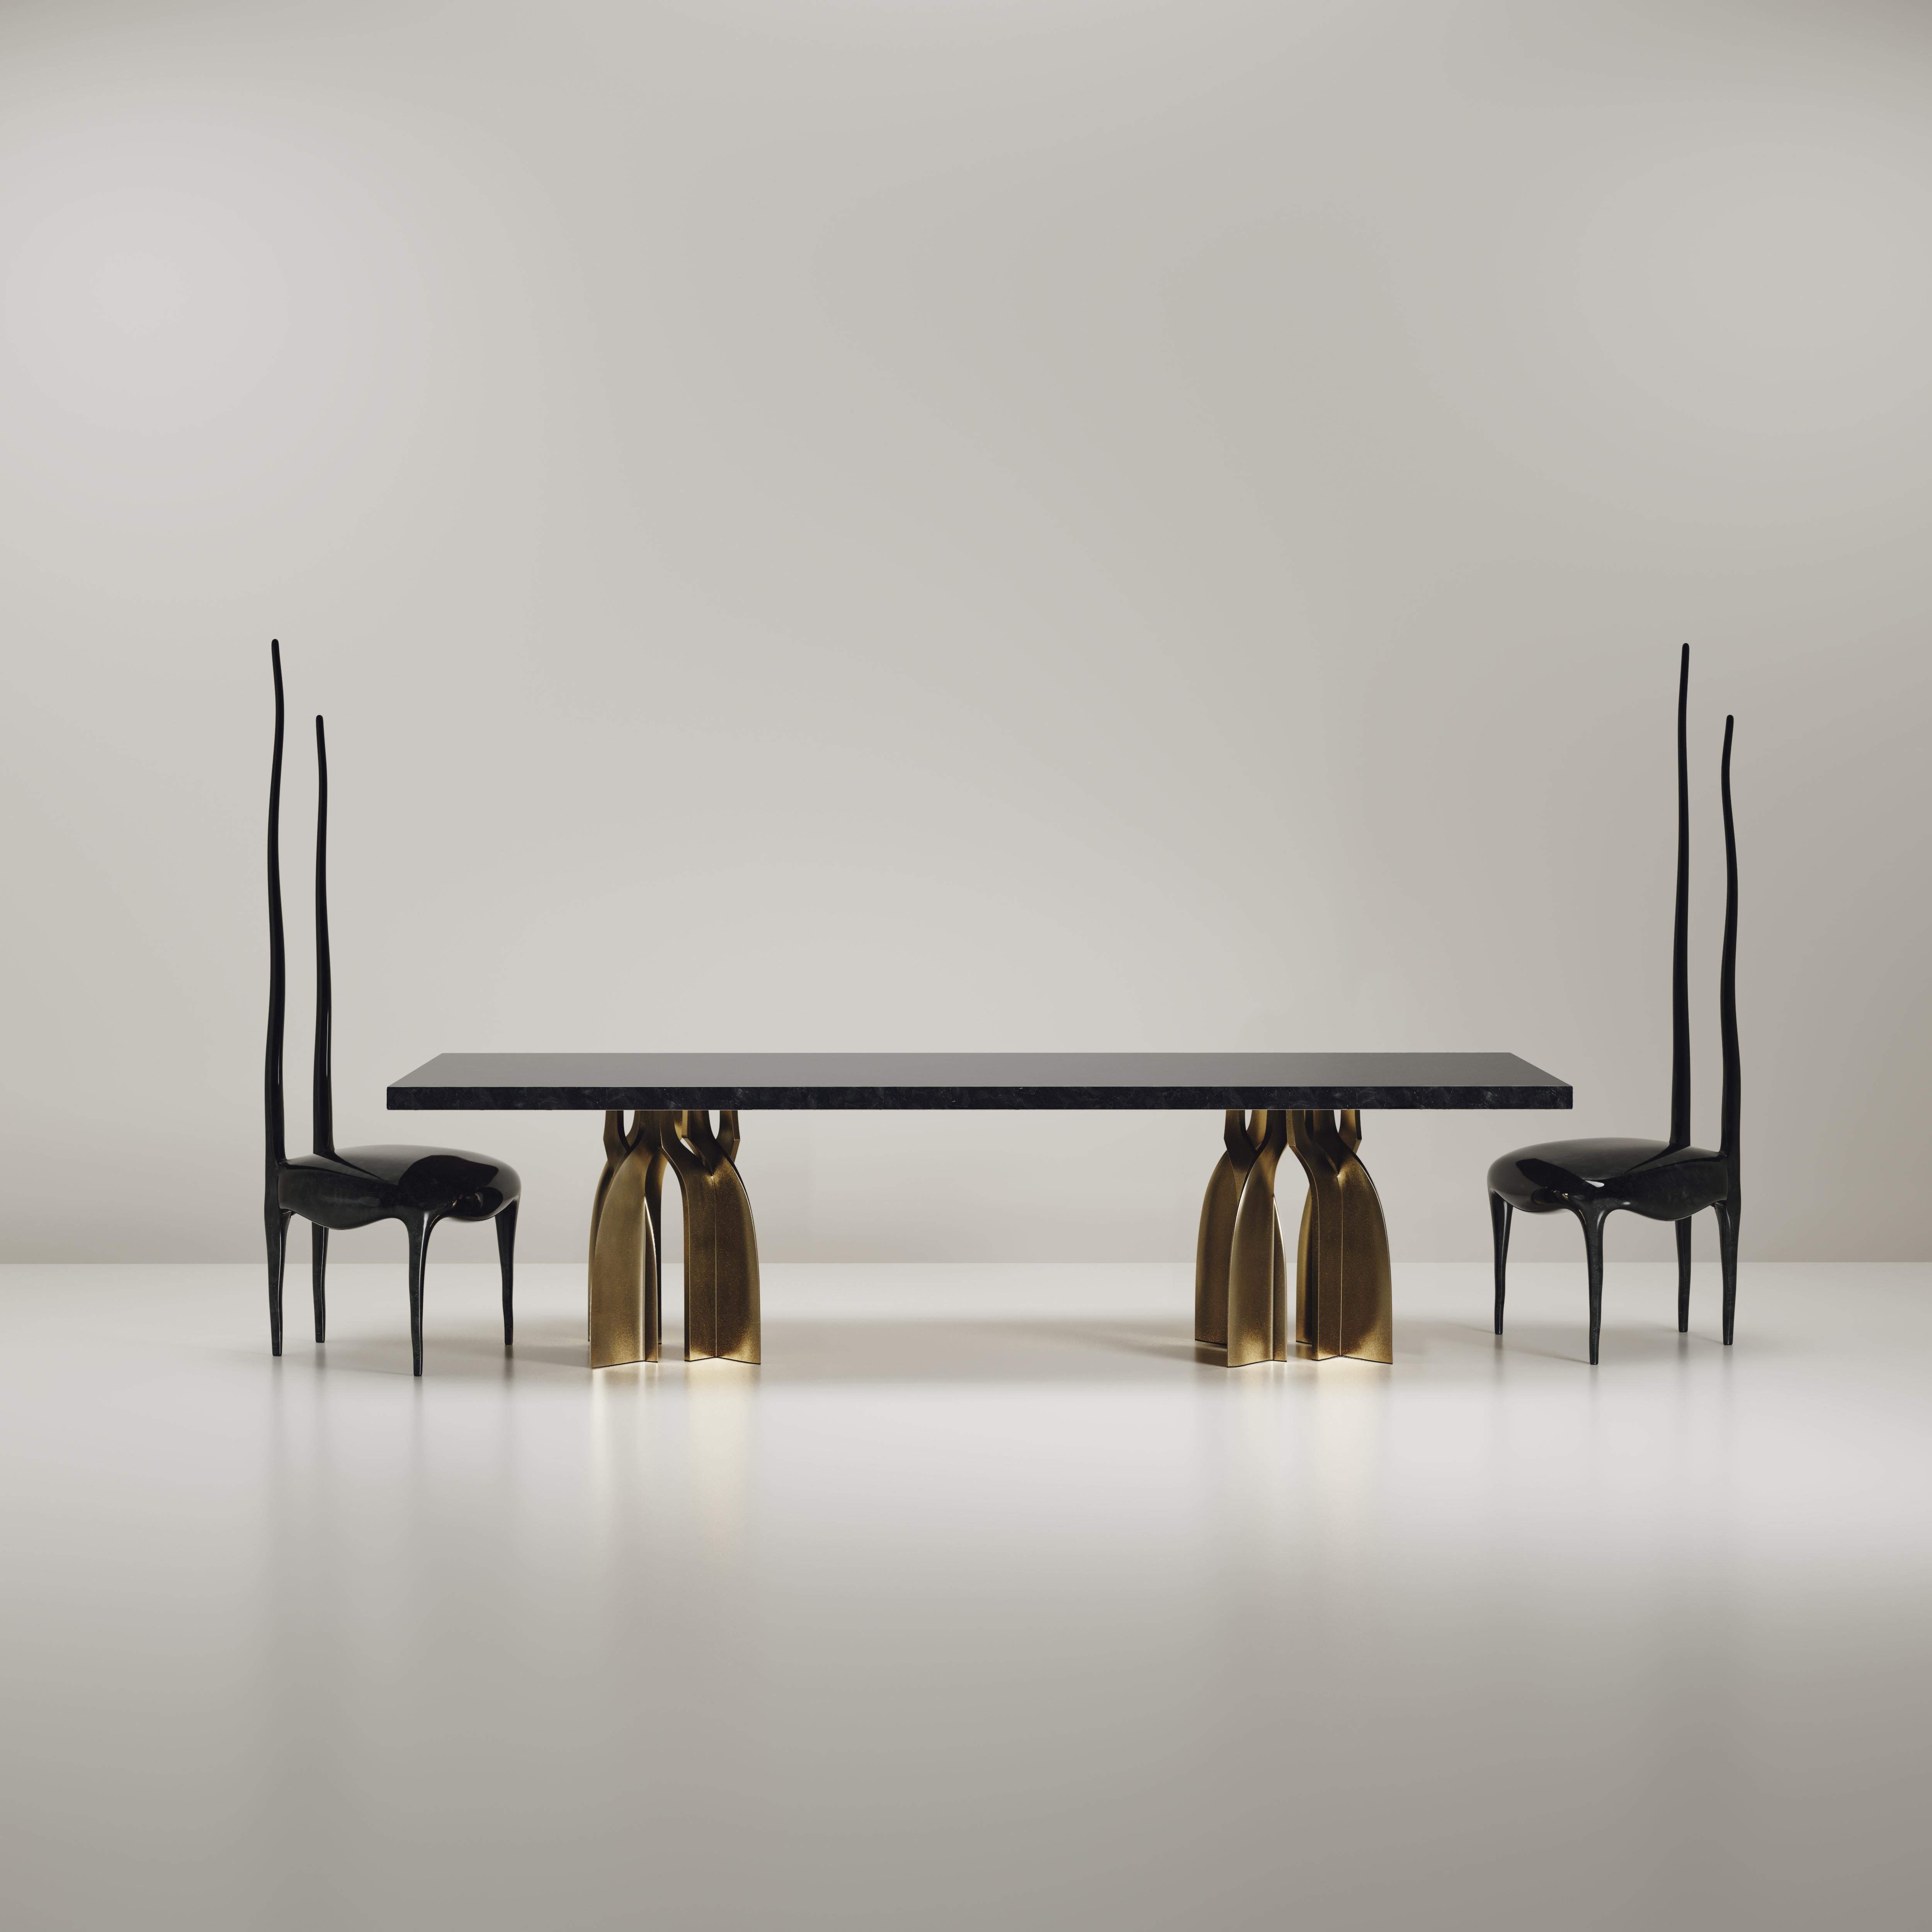 Sculptural Dining Table in Shell & Stainless Steel by Kifu Paris In New Condition For Sale In New York, NY